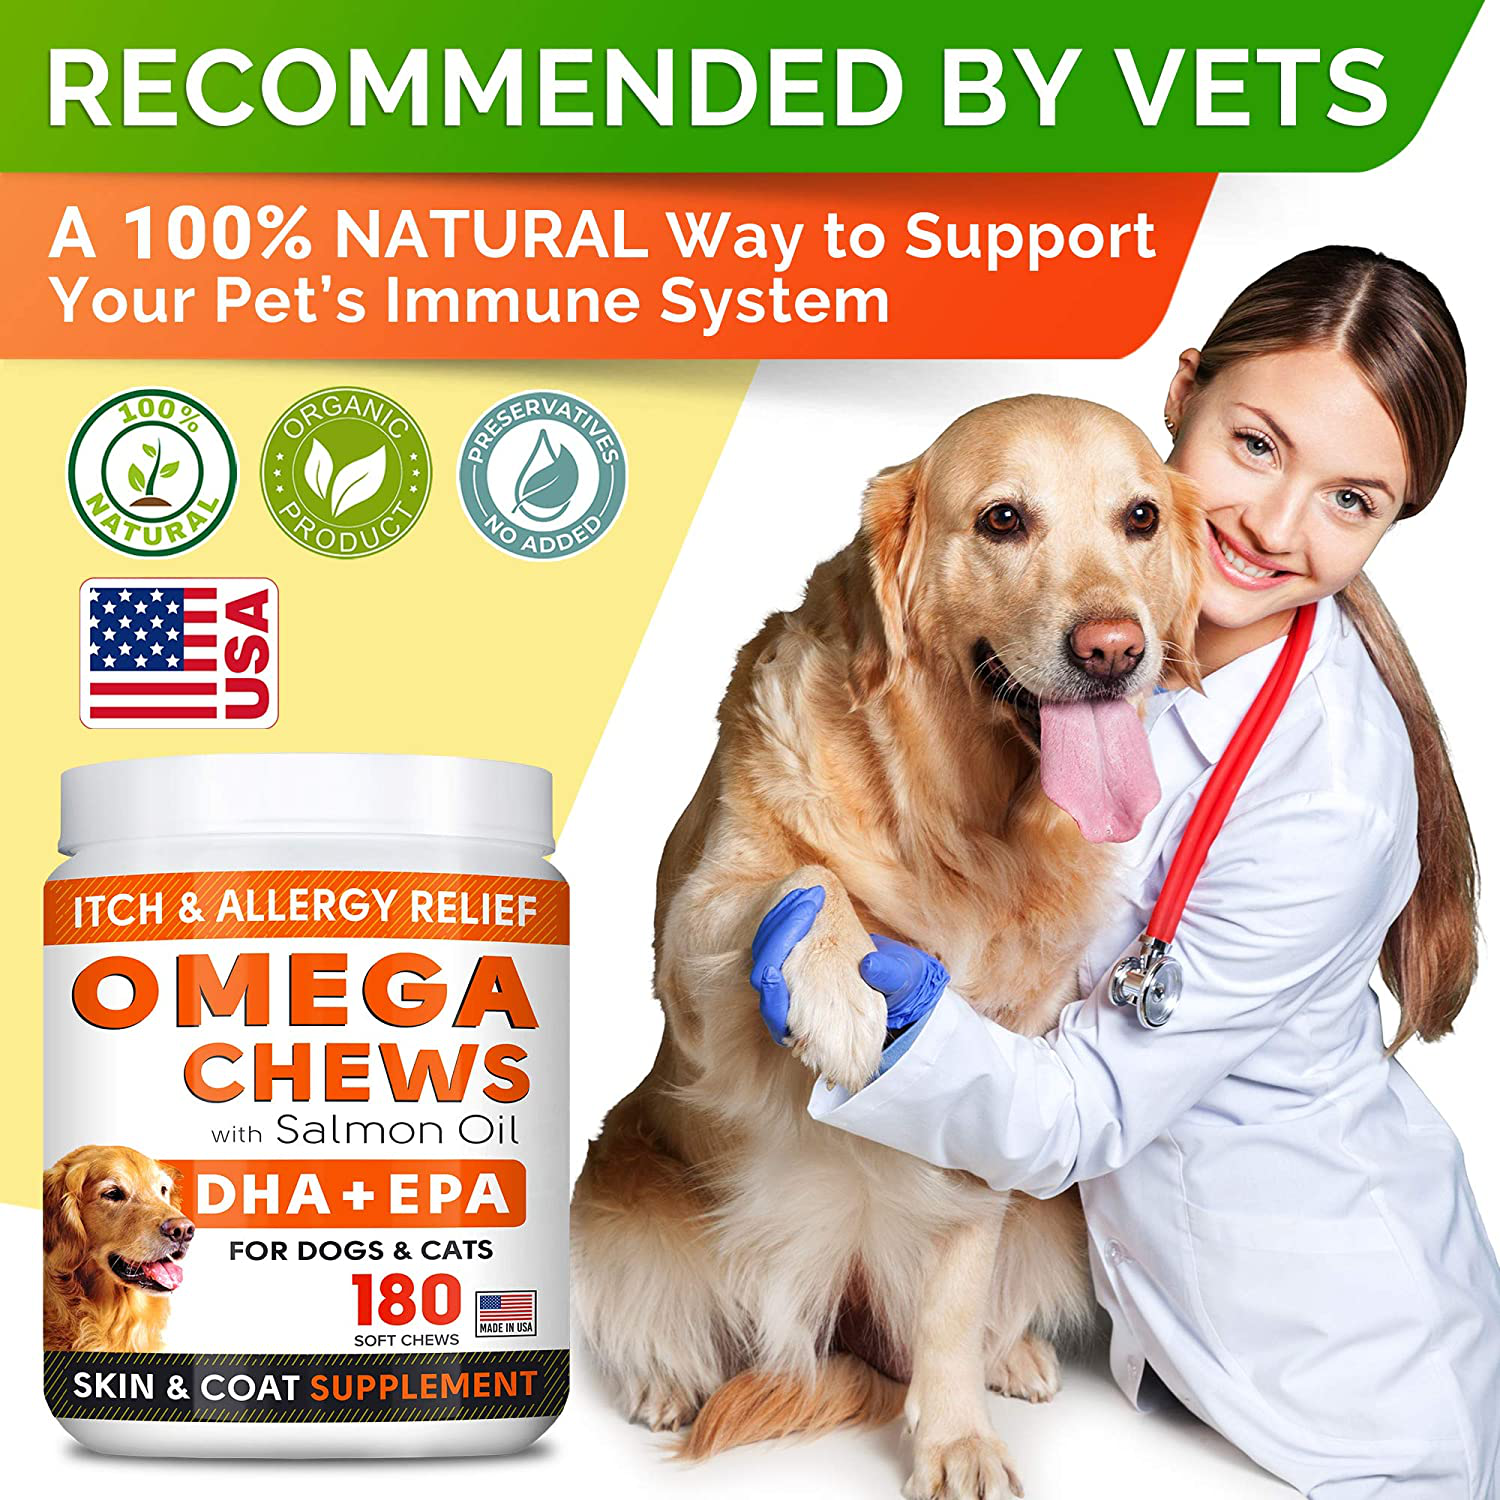 Omega 3 Treats for Dogs - Allergy Relief, Joint Health, Itch Relief, Shedding, Skin, Coat Supplement - Alaskan Salmon Oil Chews